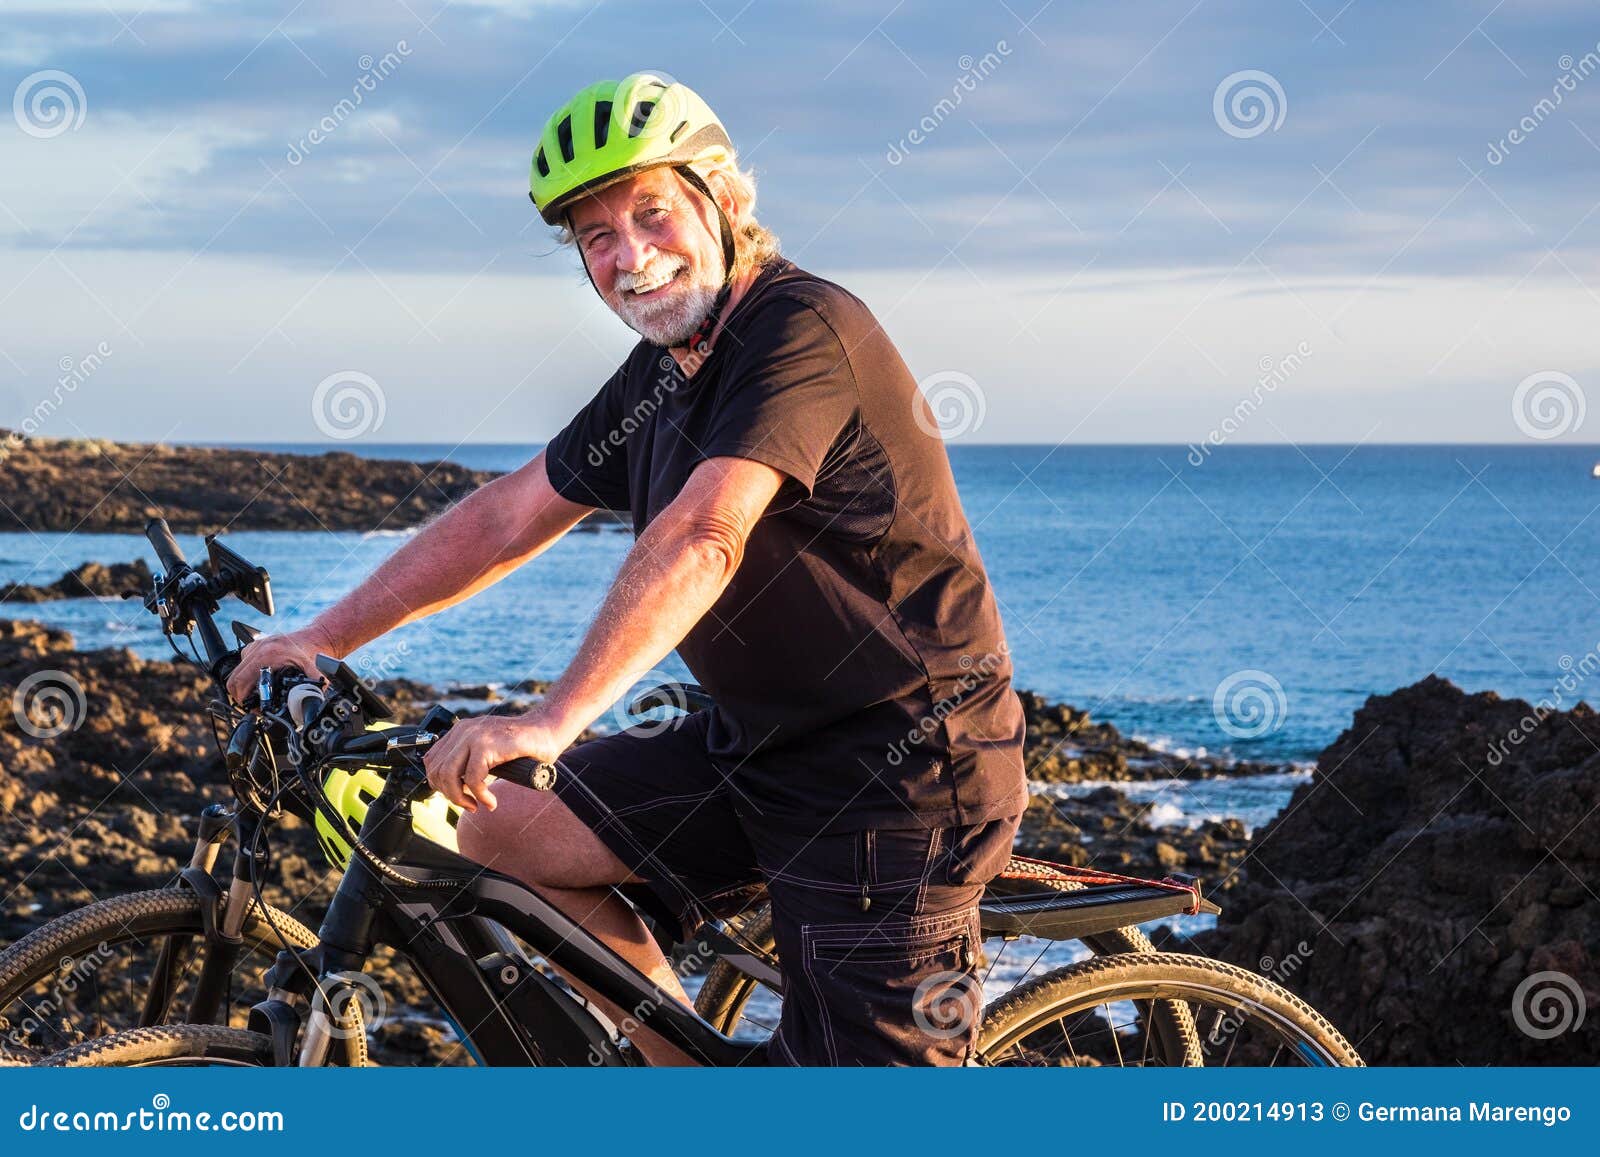 happy senior man standing on the cliff riding his bici and looking at camera.two electric bicycle close to him. blue ocean water